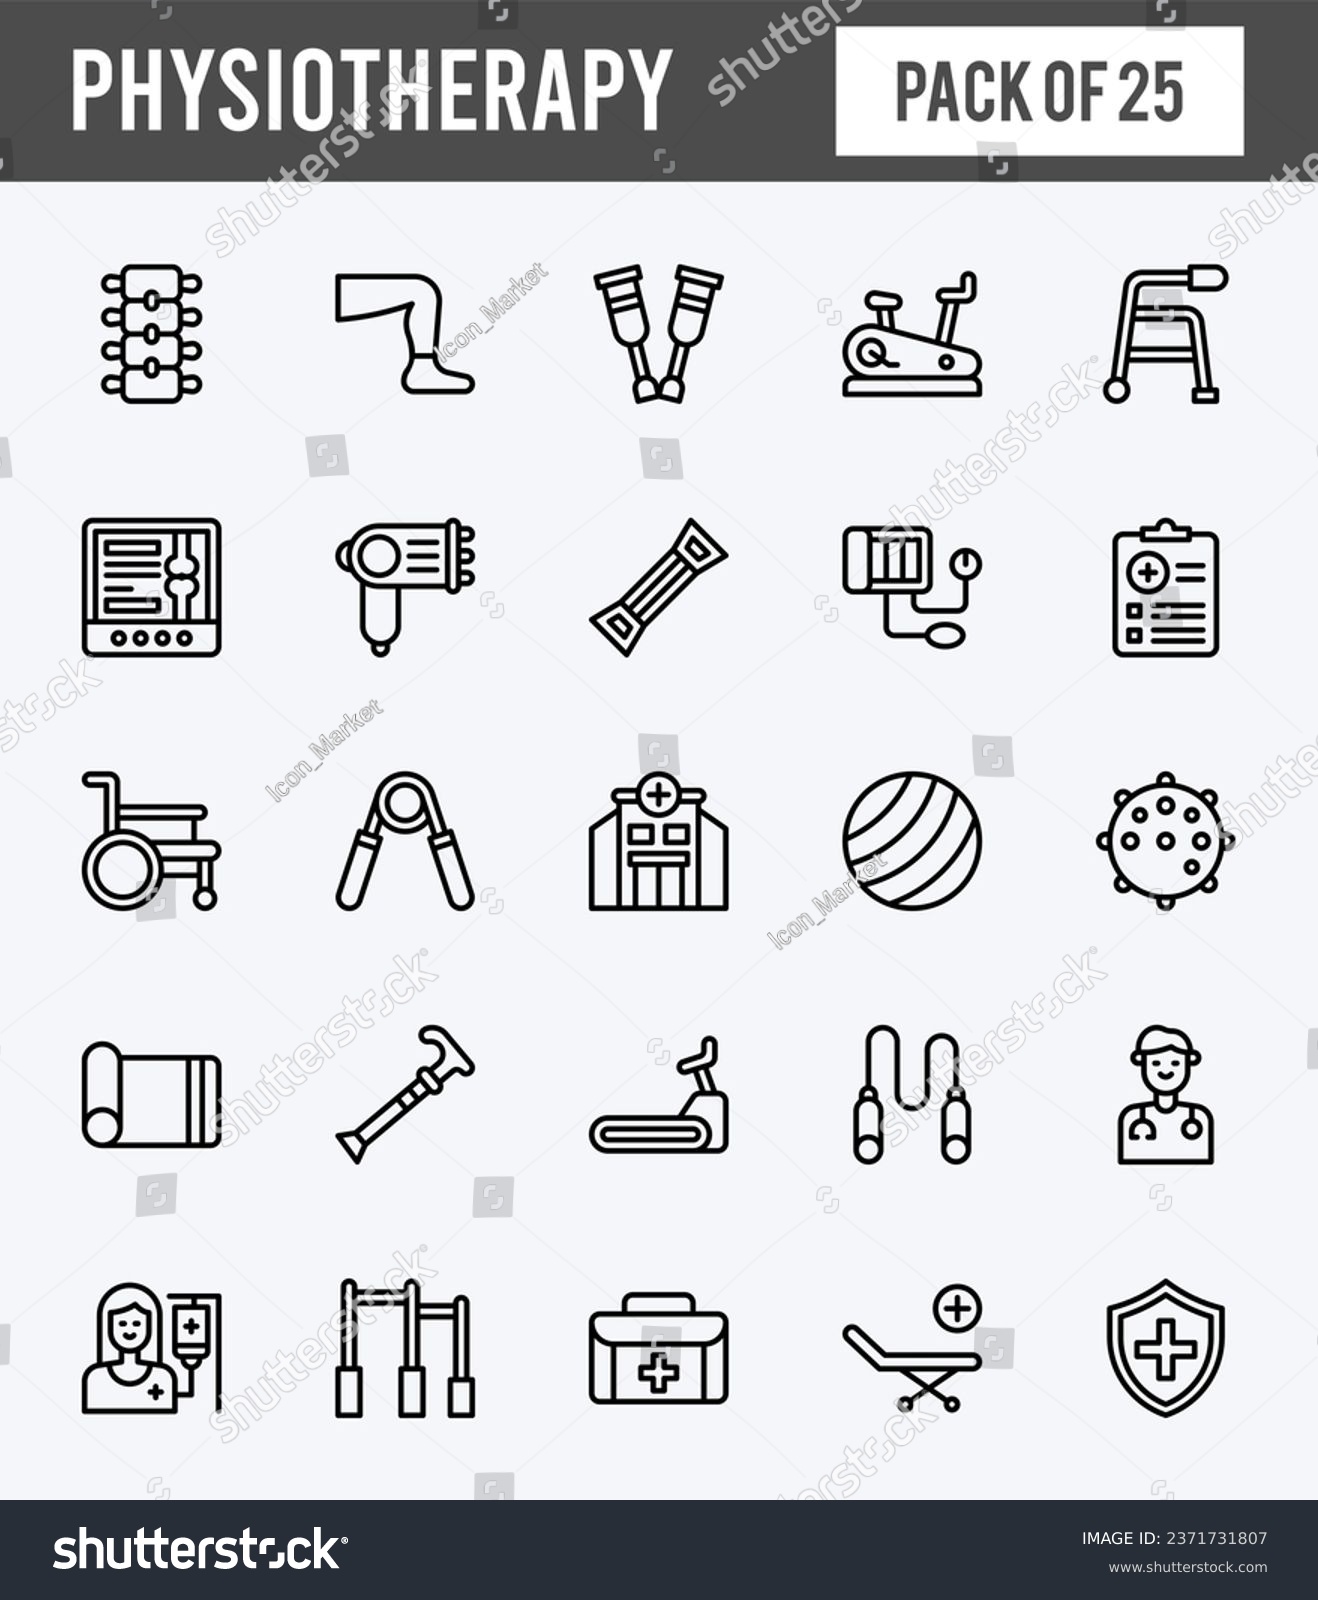 SVG of 25 Physiotherapy Lineal Expanded icons pack. vector illustration. svg